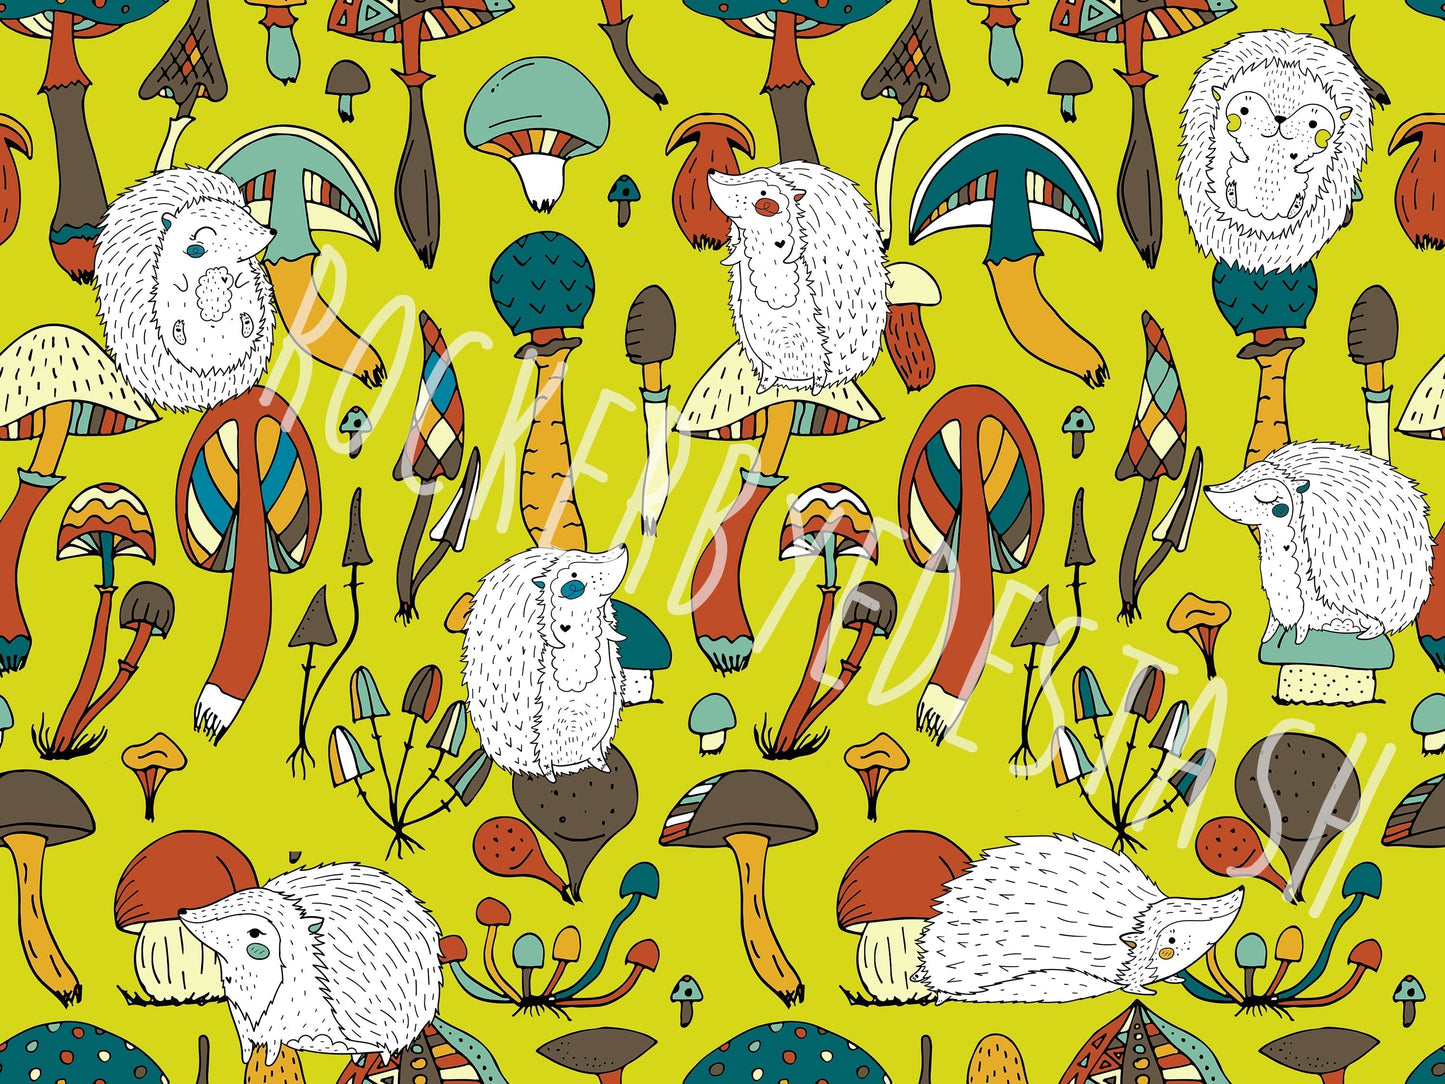 Minky - Round OO - Skulls & Shrooms, Magical Forest, New Wilderness & Hedgies - Fabric Retail